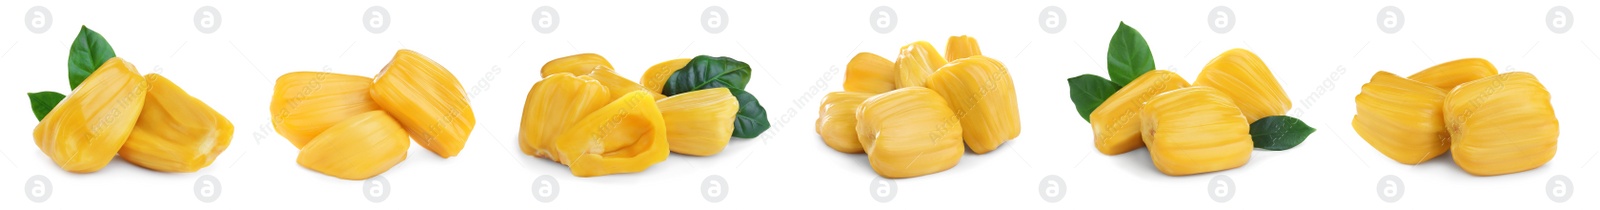 Image of Delicious exotic jackfruit bulbs on white background. Banner design